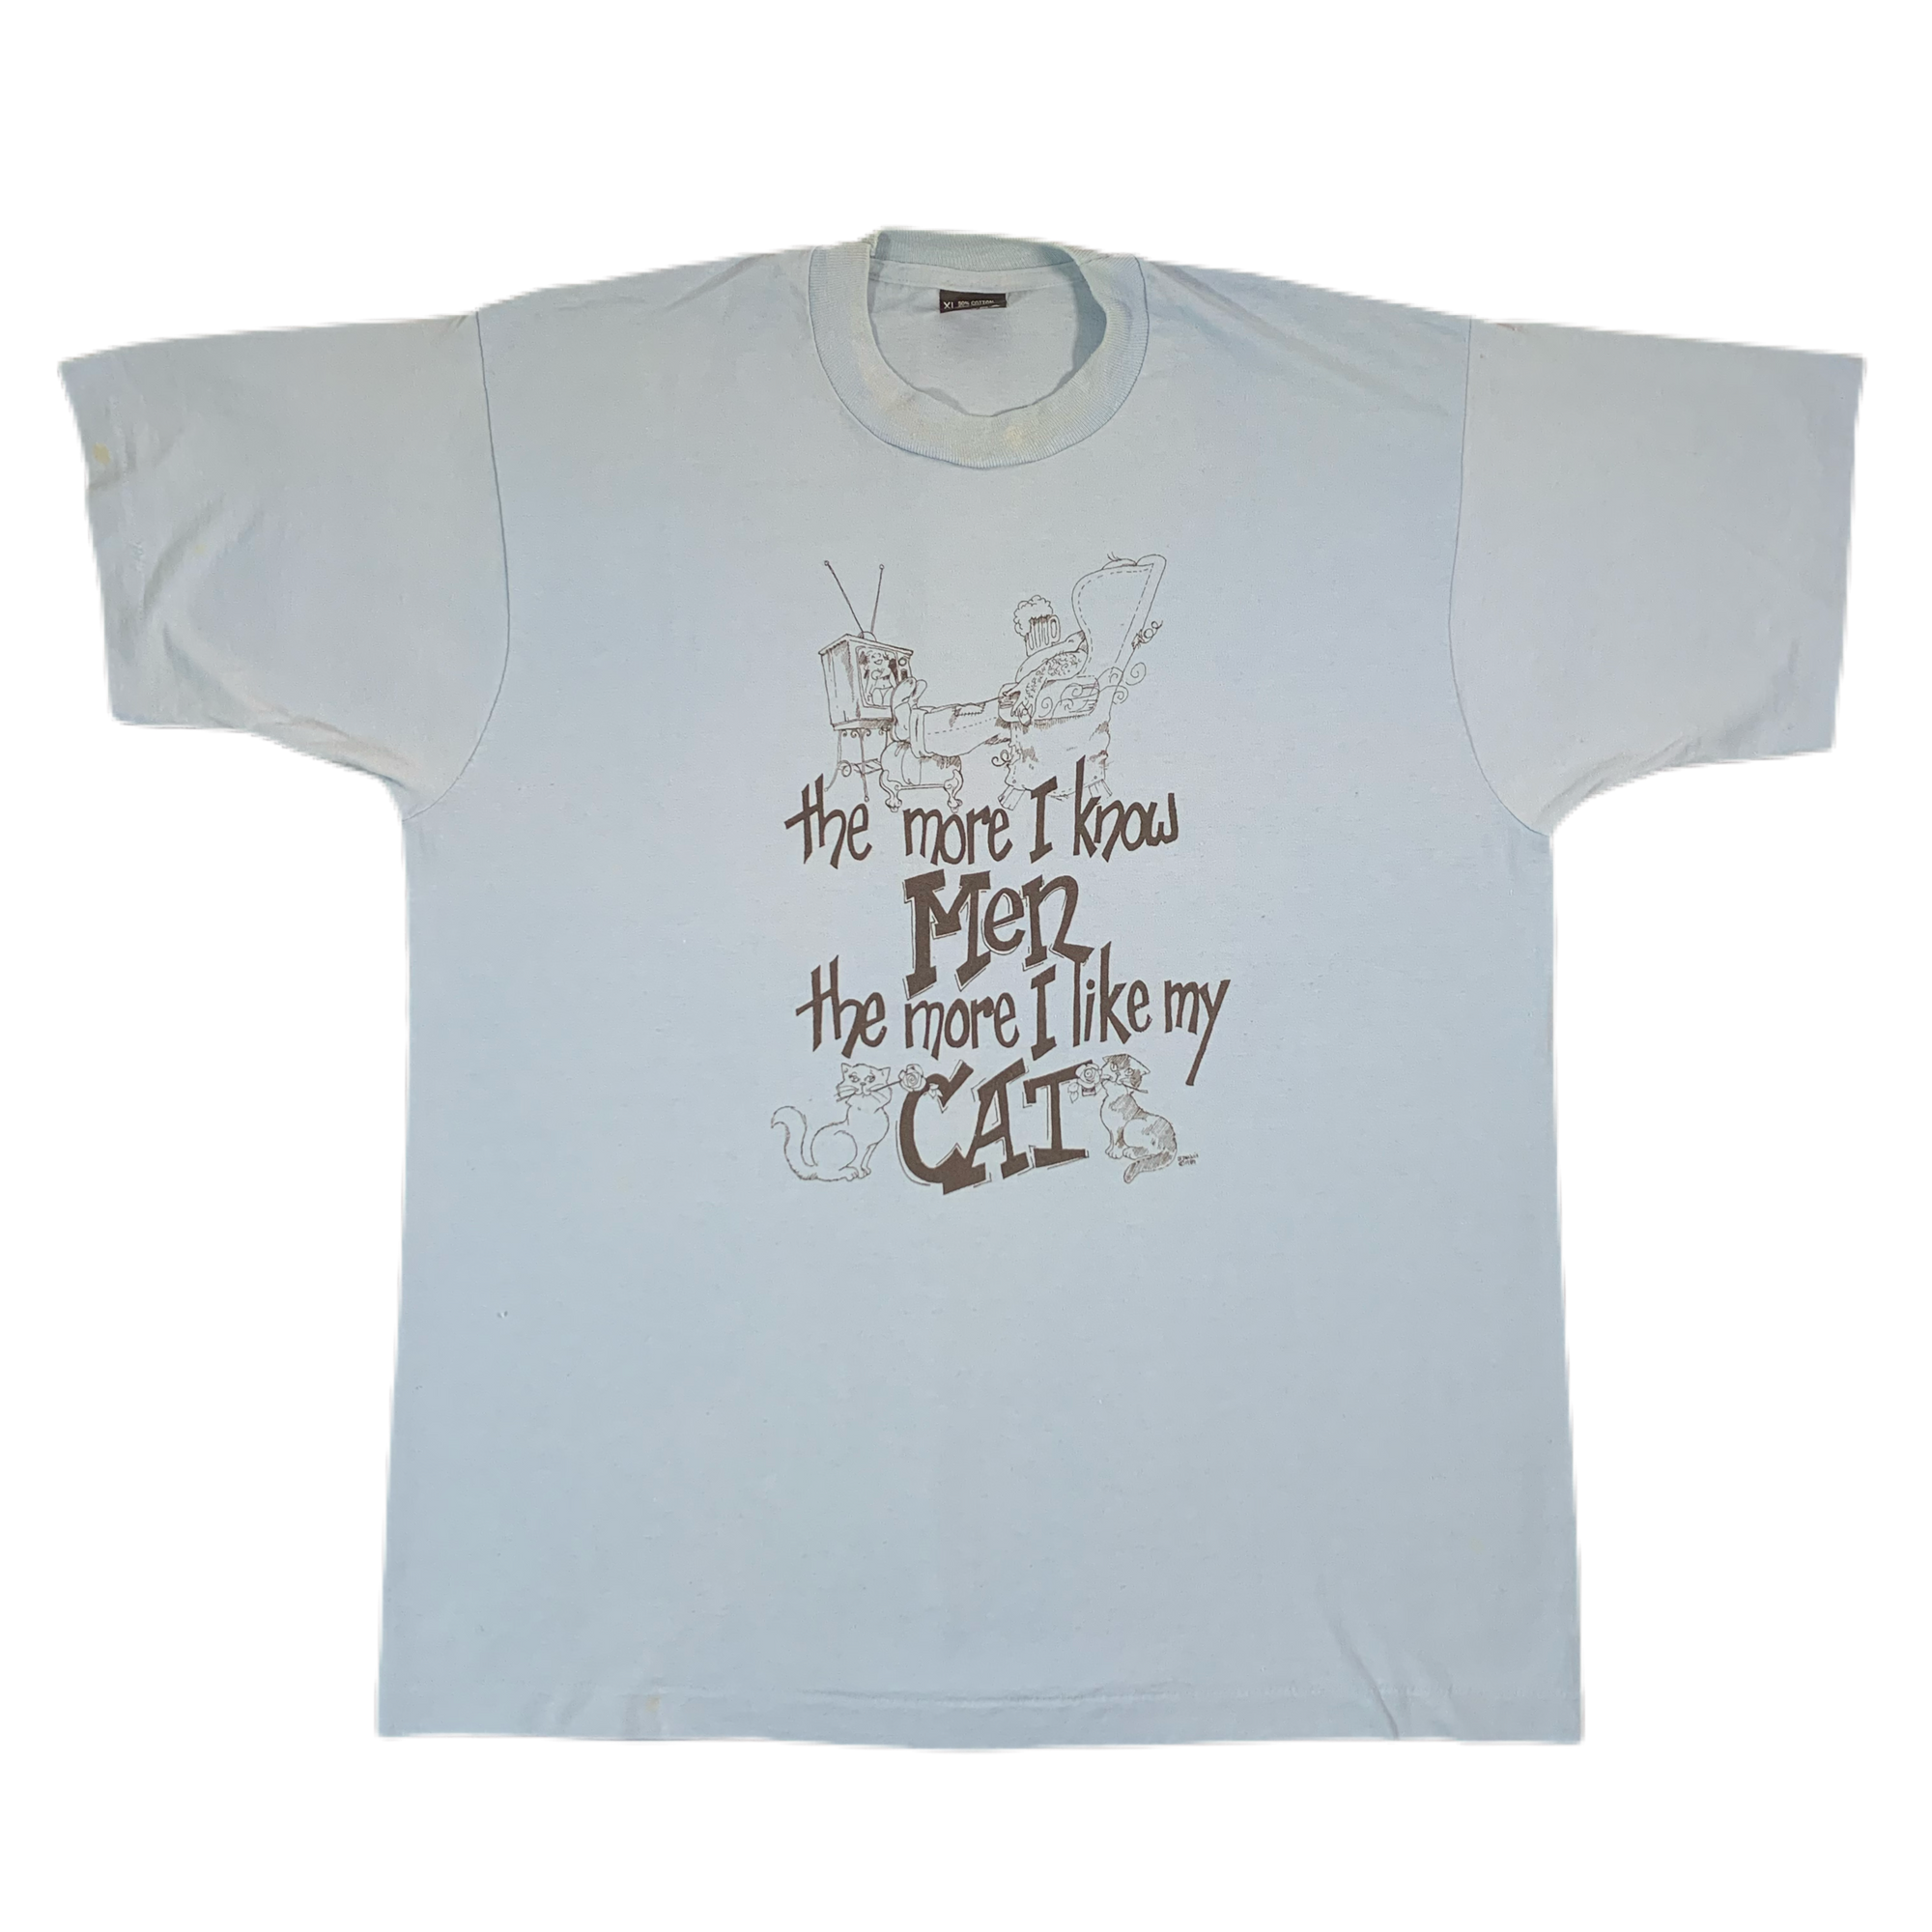 Vintage The More I Know Men “The More I Like My Cat” T-Shirt - jointcustodydc